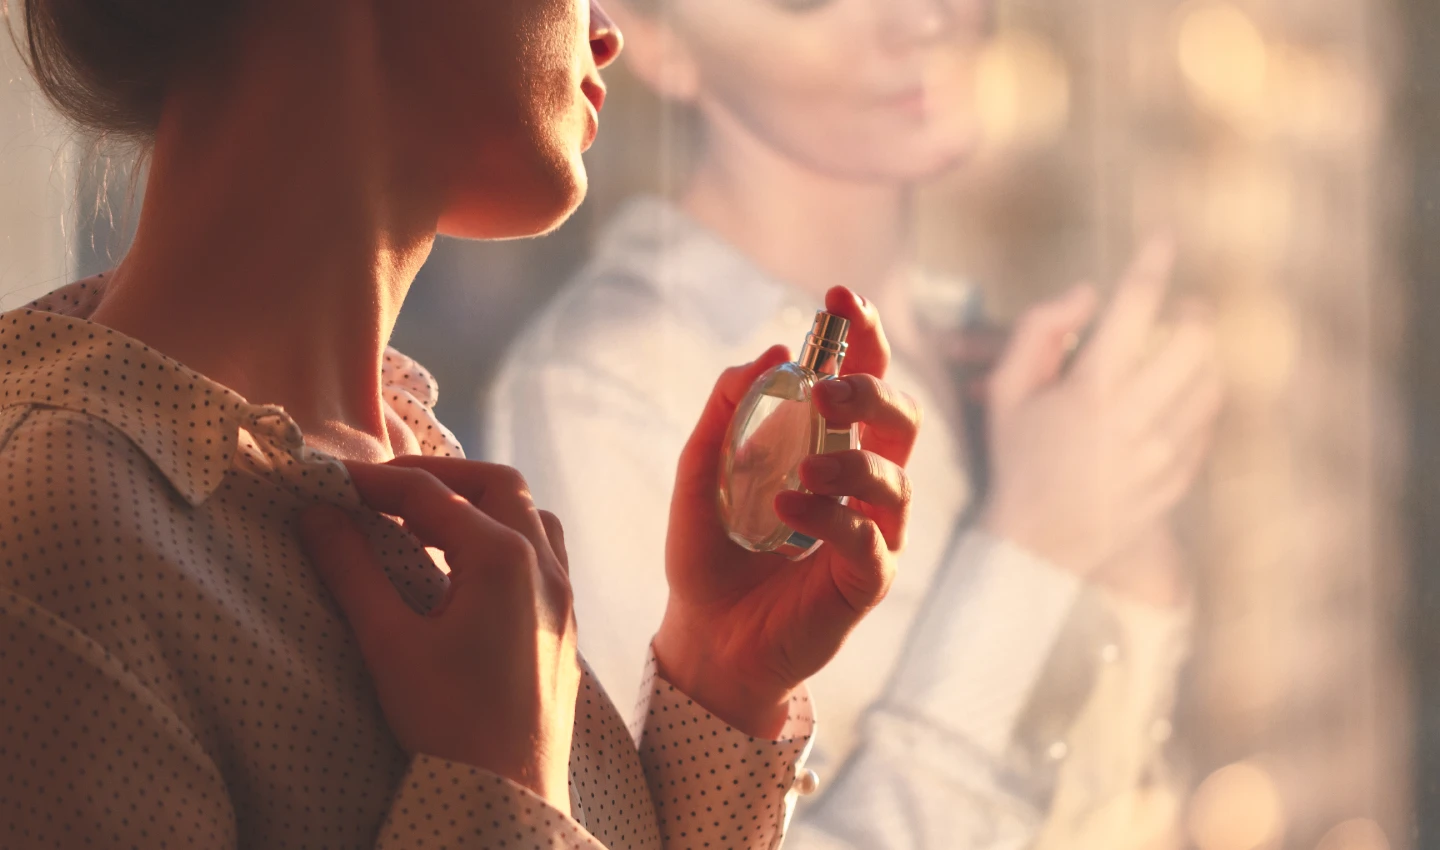 A woman applying perfume, demonstrating a step towards achieving long-lasting fragrance bliss.